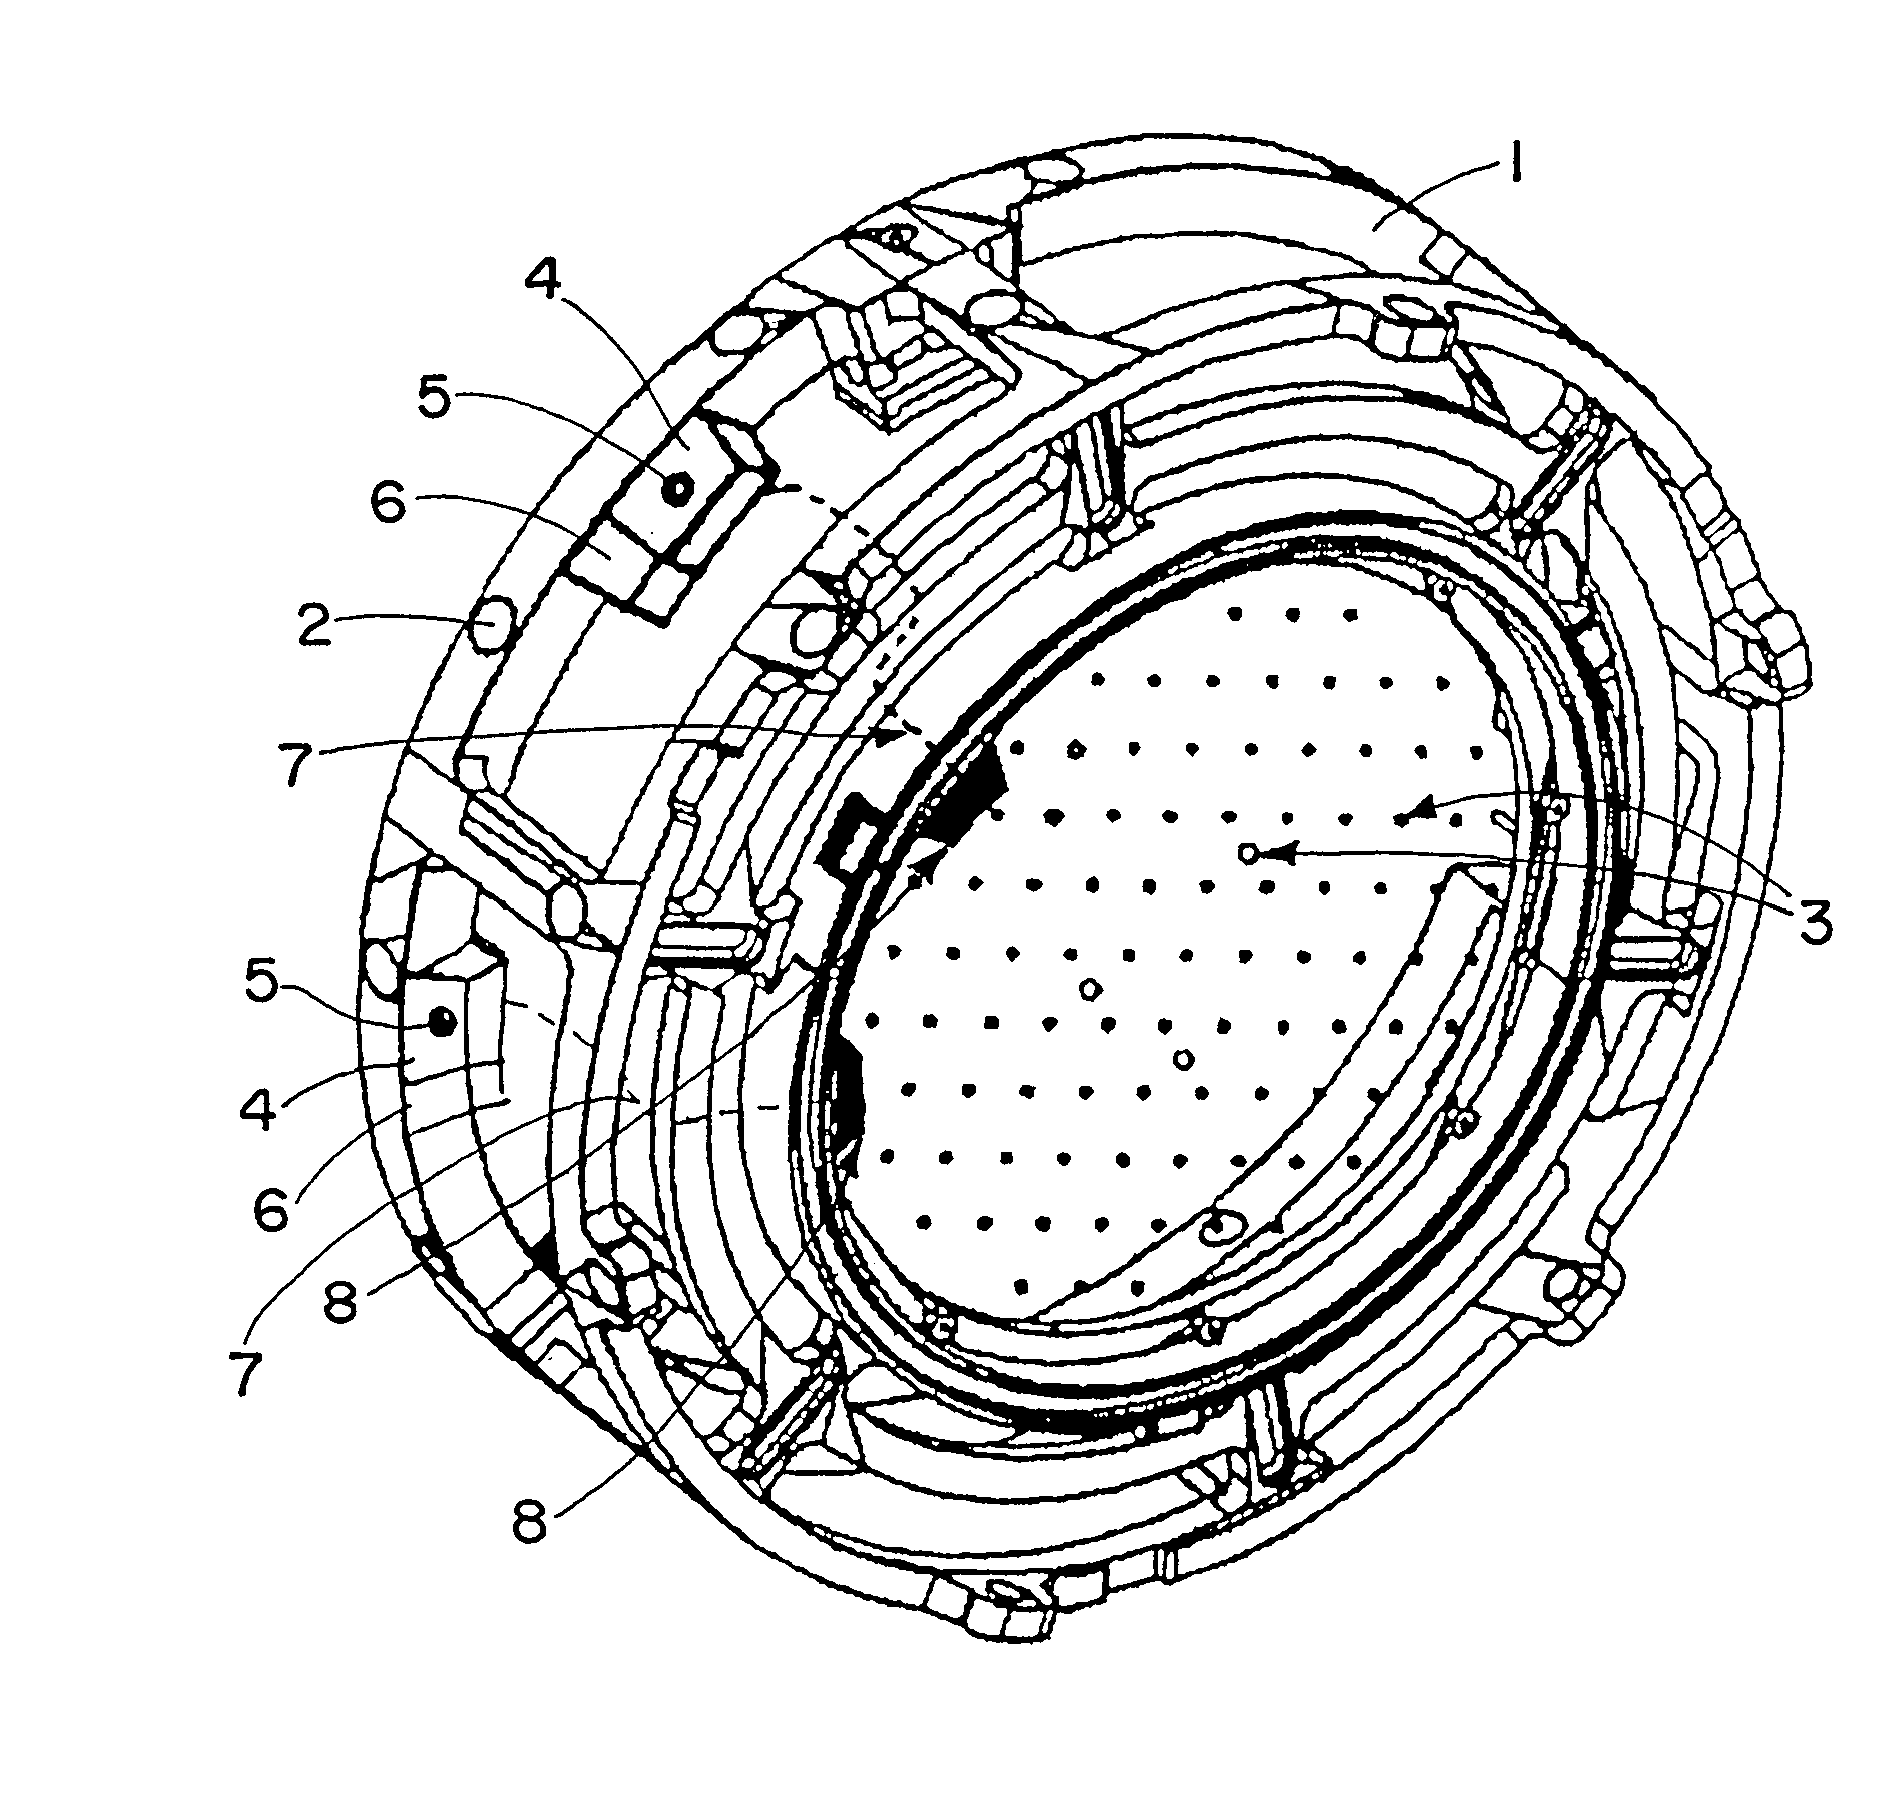 Medical x-ray detection device including an active optical signal emitter